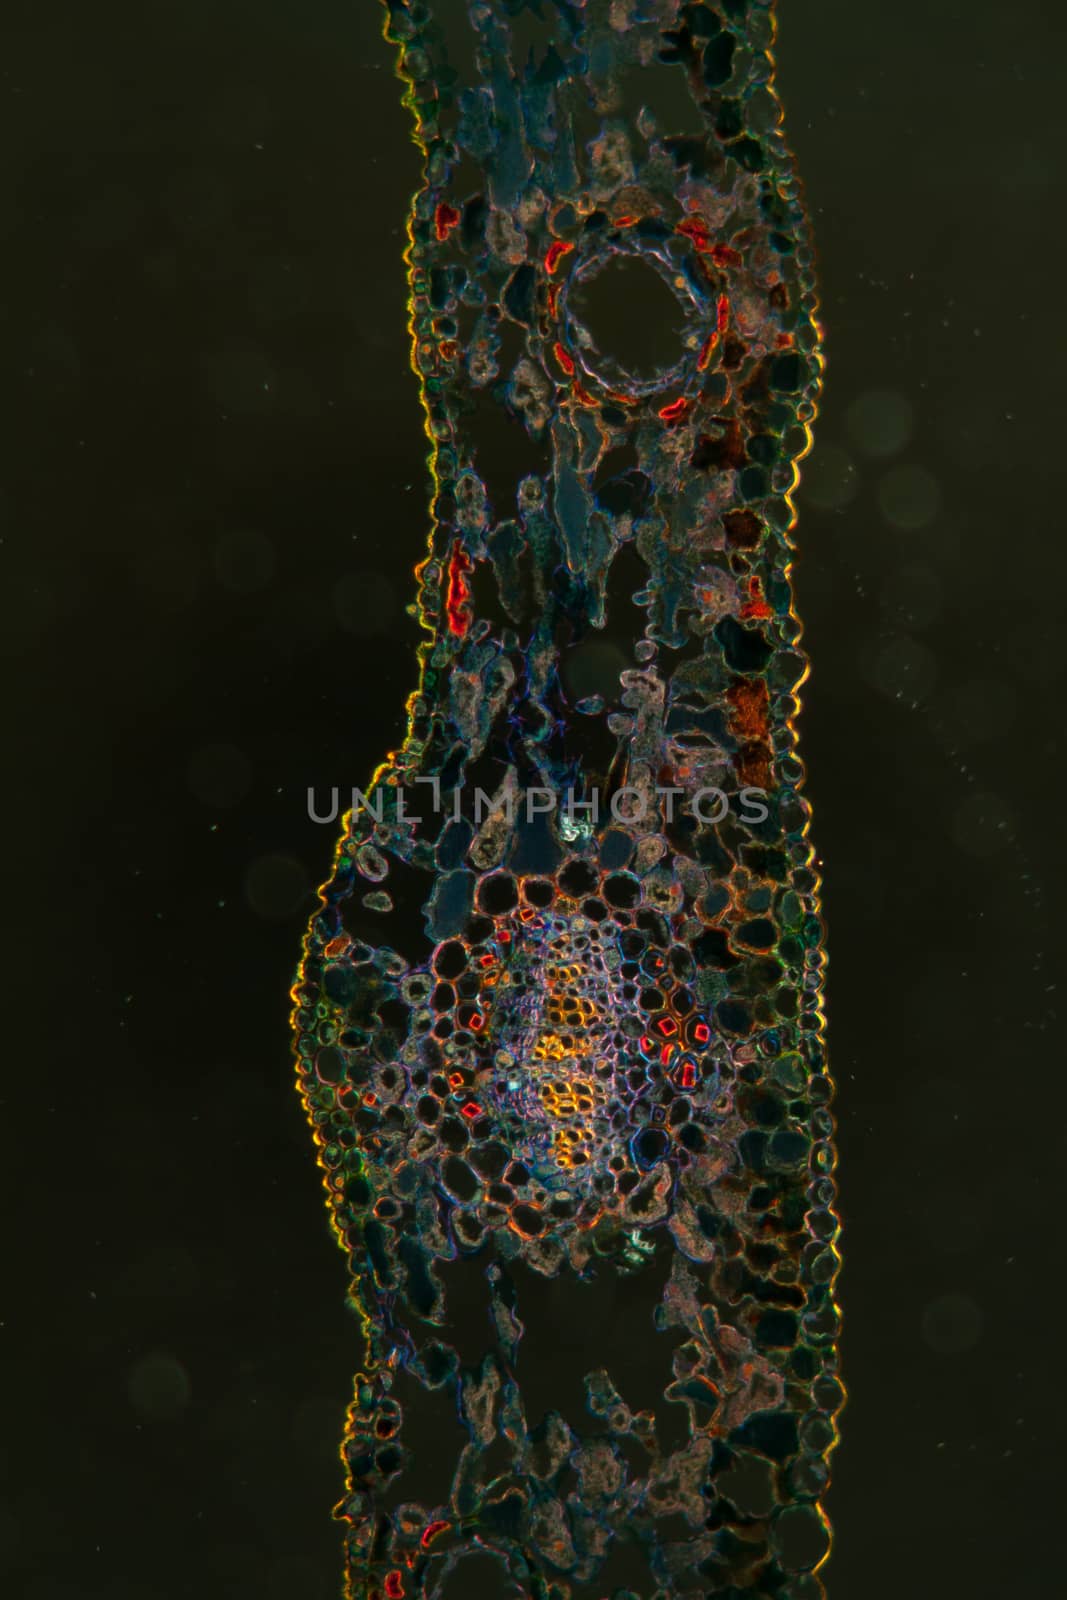 Sheet cross section under the microscope 100x by Dr-Lange